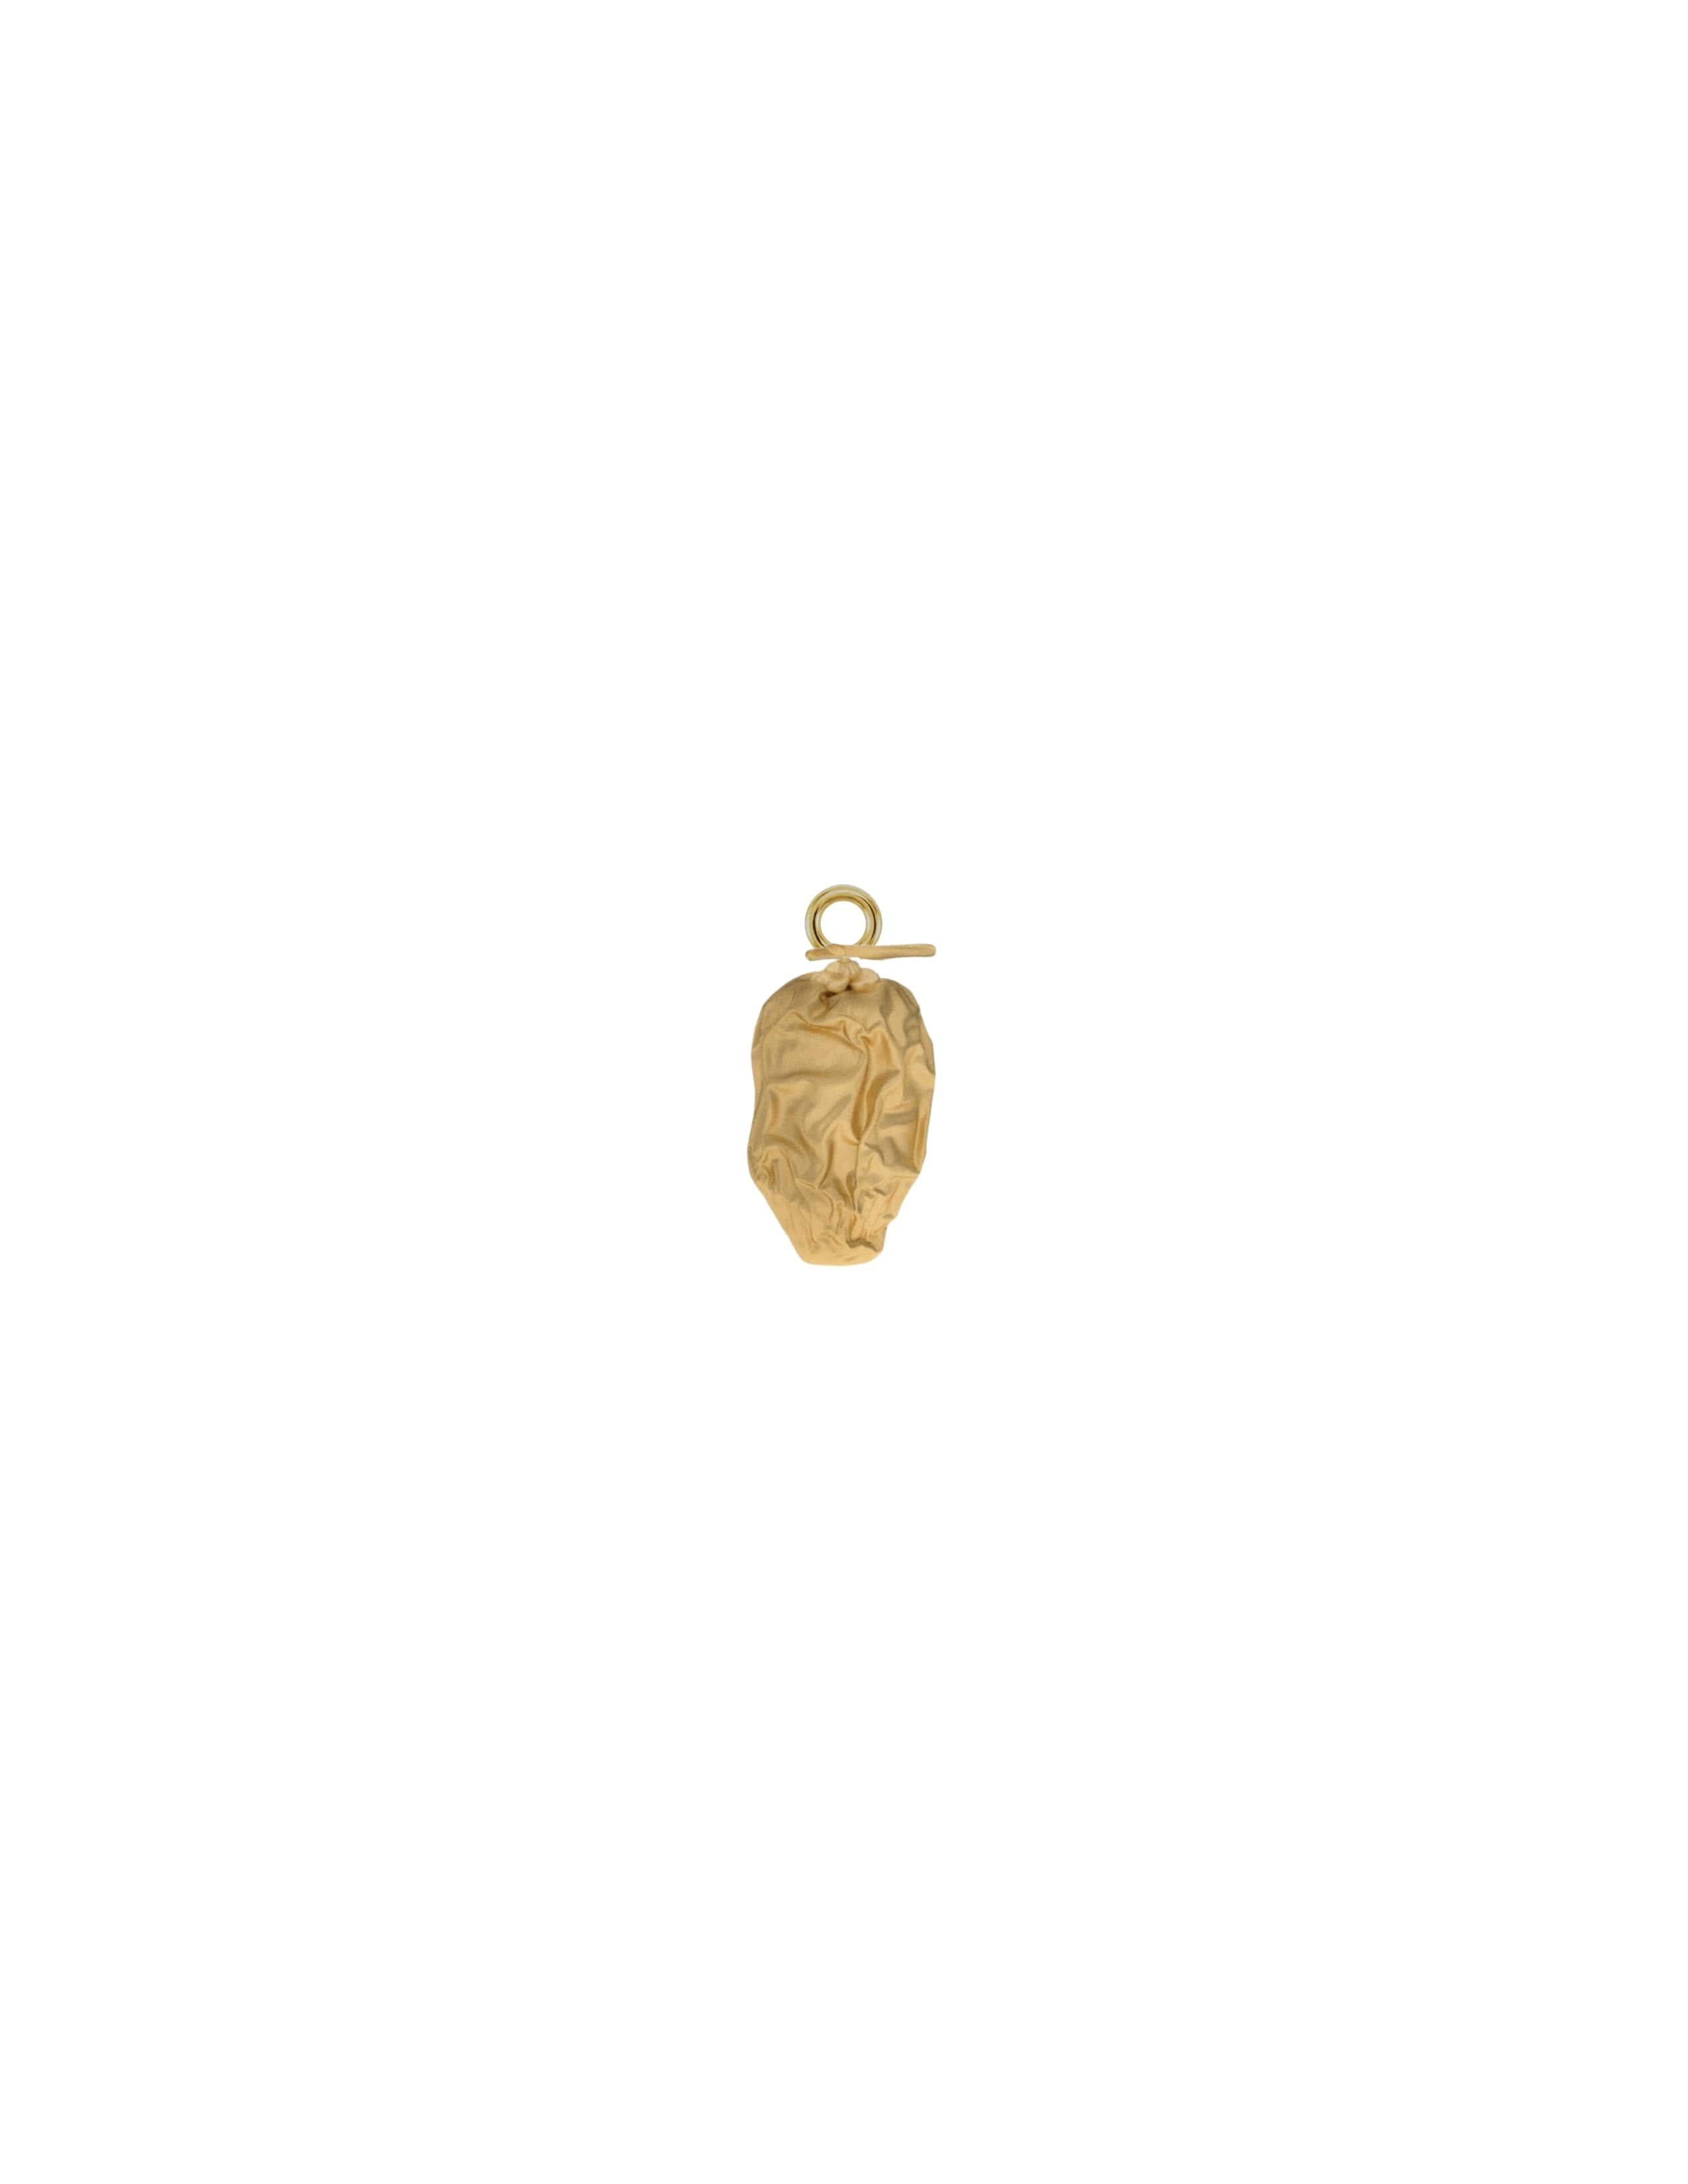 Dates symbolize something different to every culture, but the shared value revolves around nourishment and life. 


Note: Growing up in the US, I could rarely find jewelry charms that spoke to my Middle Eastern roots, so I made one.

 

14k Solid